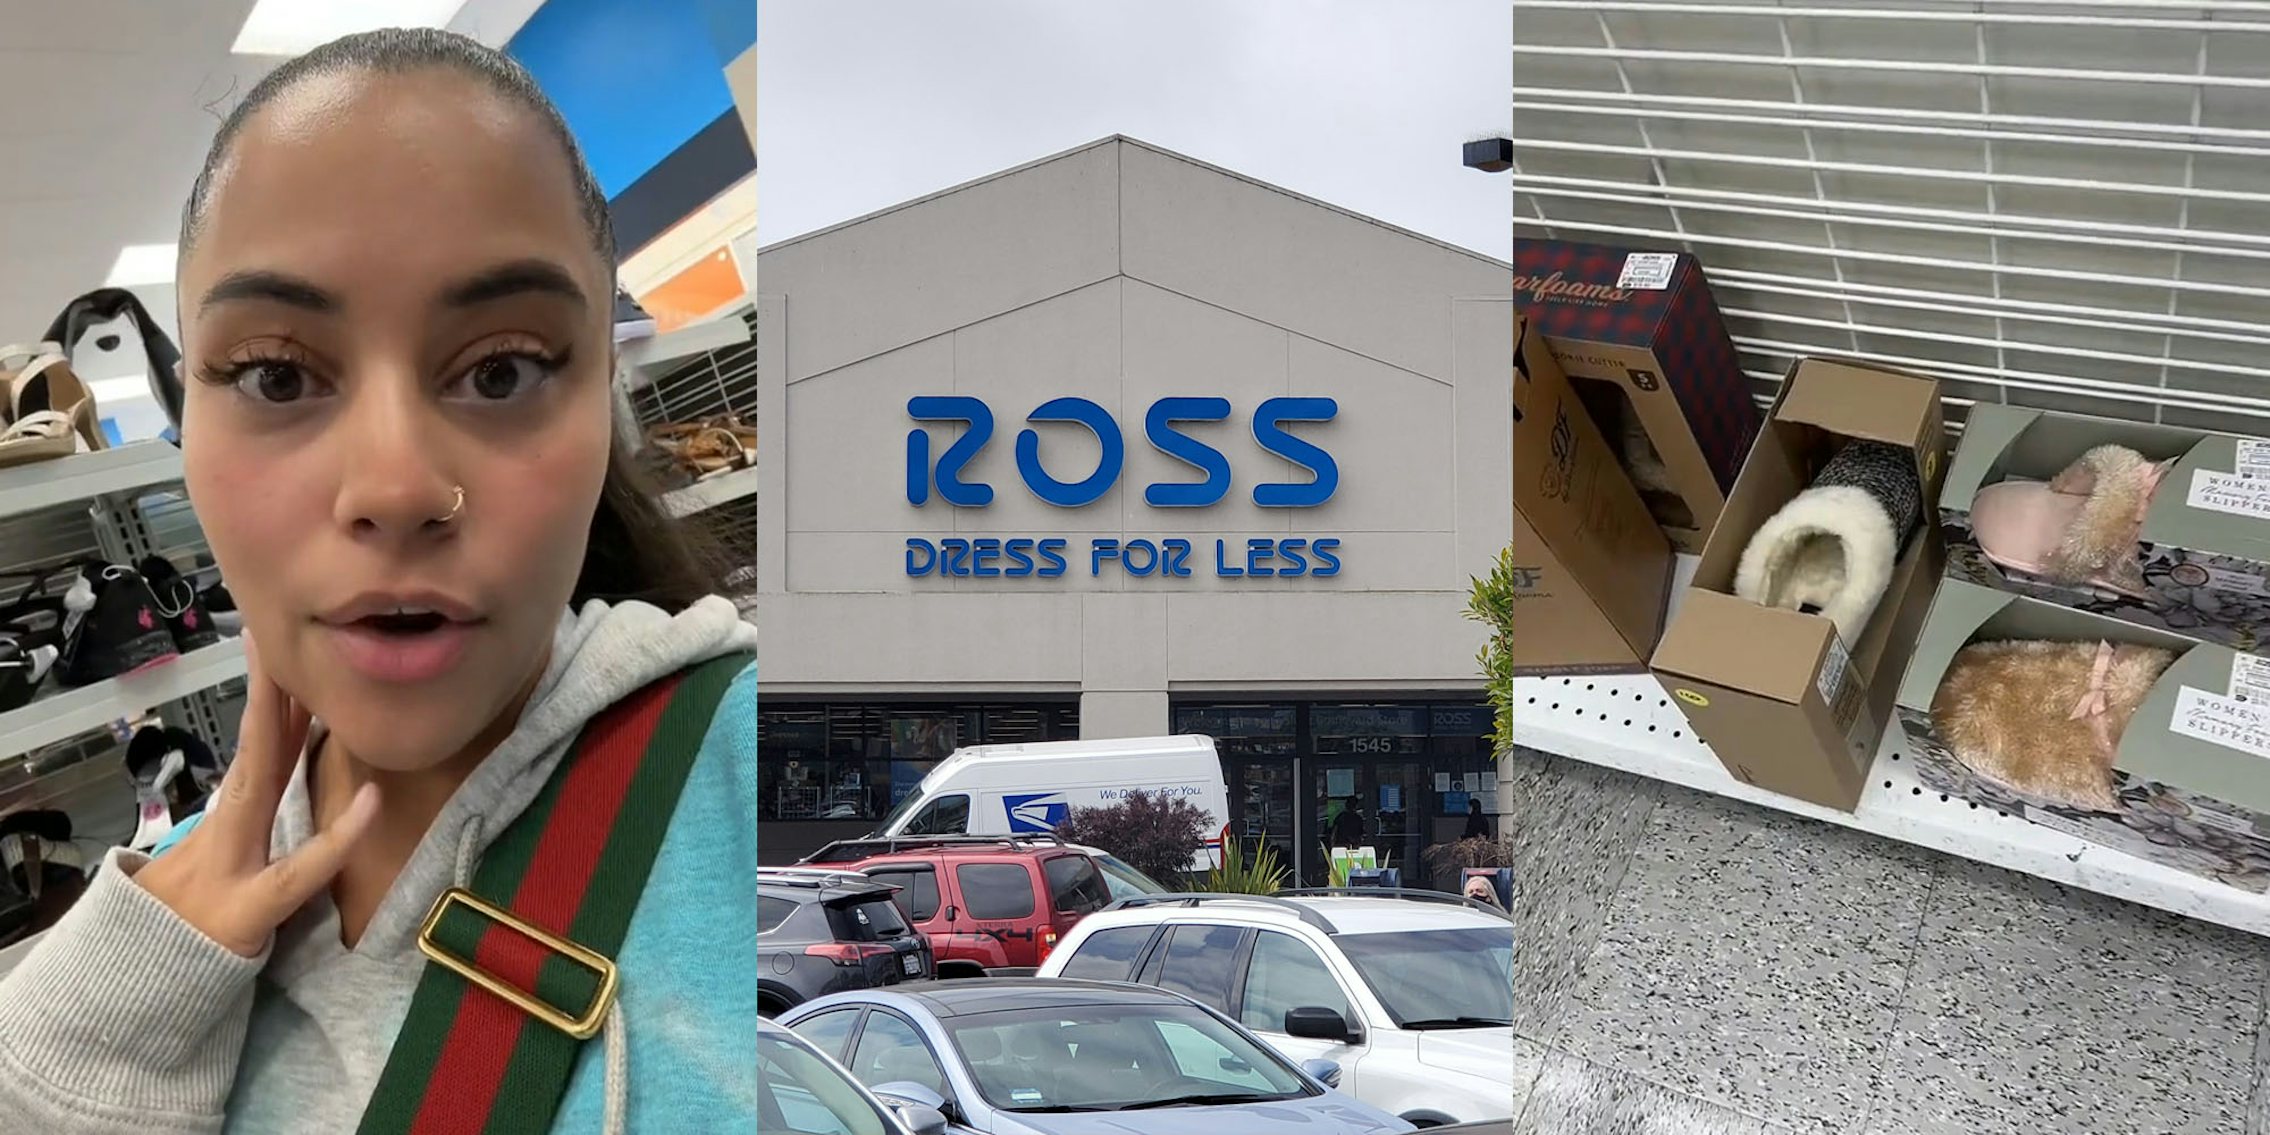 woman speaking while shopping at Ross (l) Ross Dress For Less sign on building (c) Ross interior shelf with slippers (r)